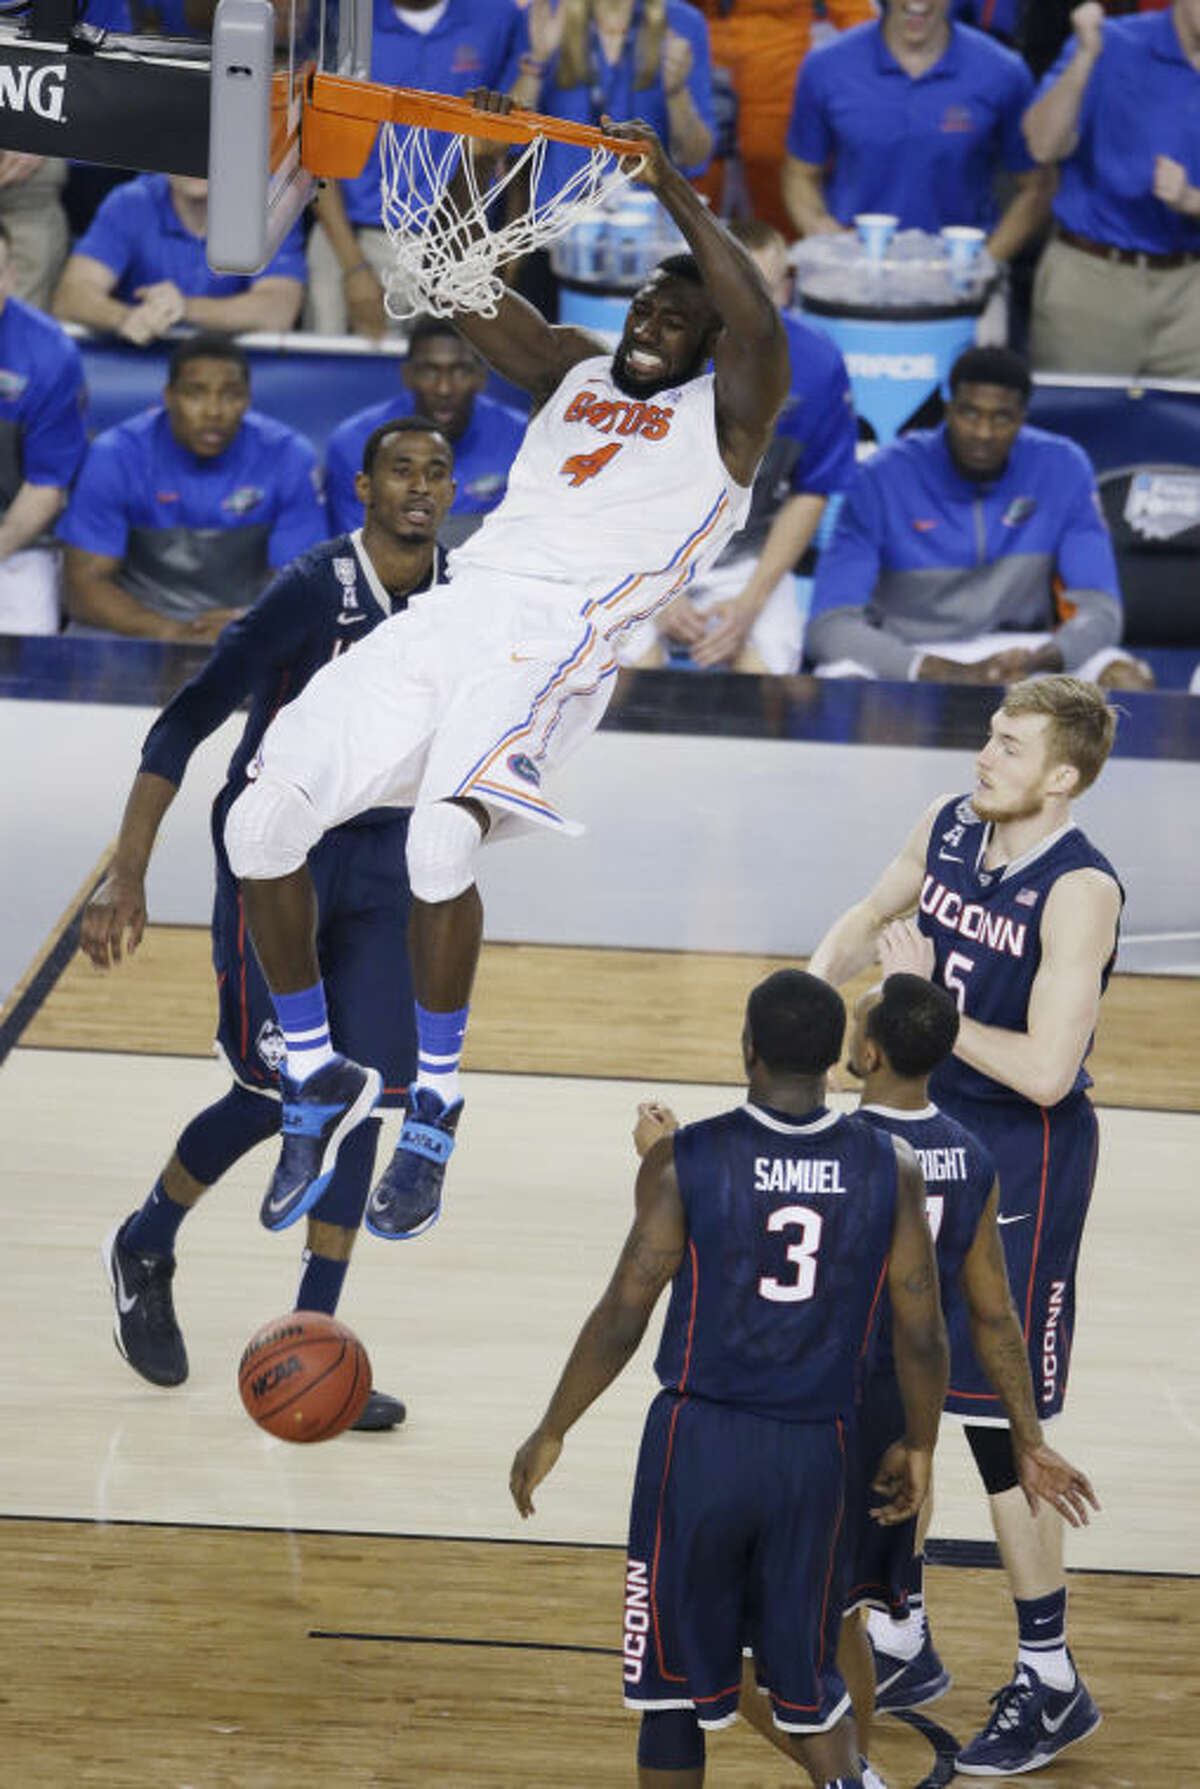 Florida center Patric Young (4) dunks the ball in front of Connecticut guard Terrence Samuel (3) during the second half of an NCAA Final Four tournament college basketball semifinal game Saturday, April 5, 2014, in Arlington, Texas. (AP Photo/Tony Gutierrez)